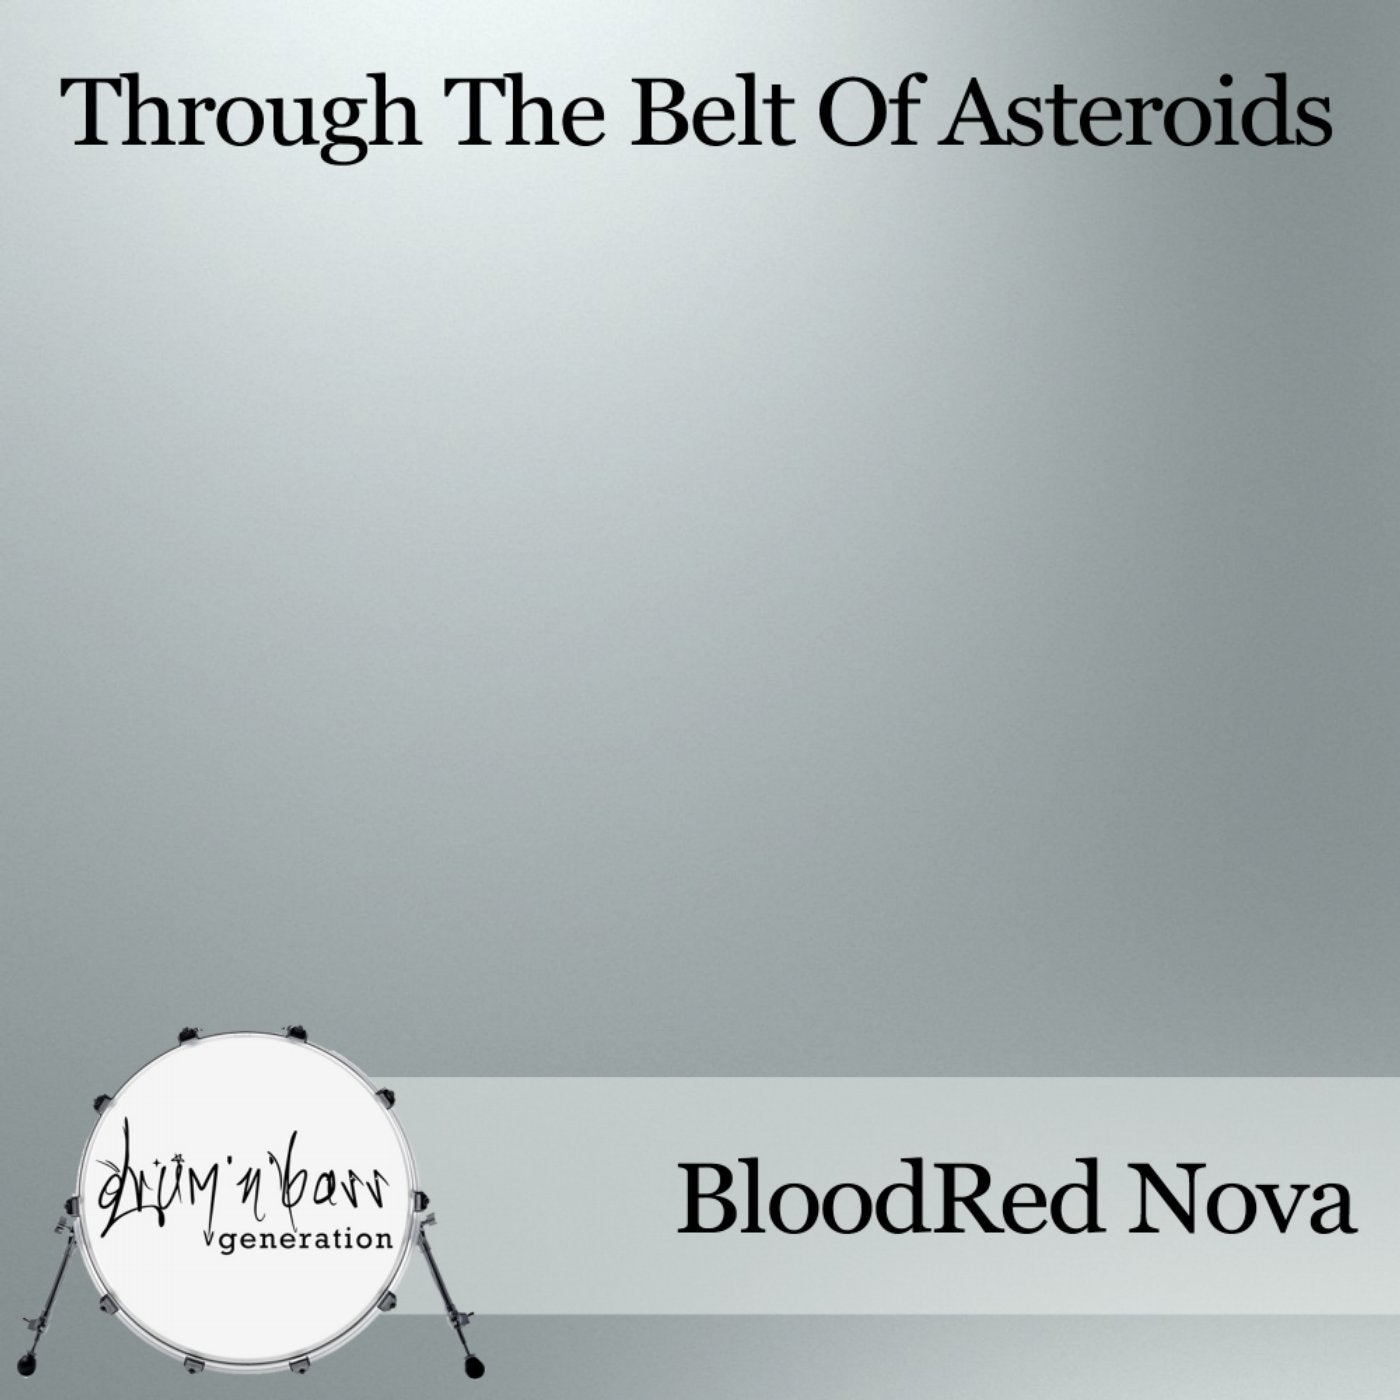 Through The Belt Of Asteroids